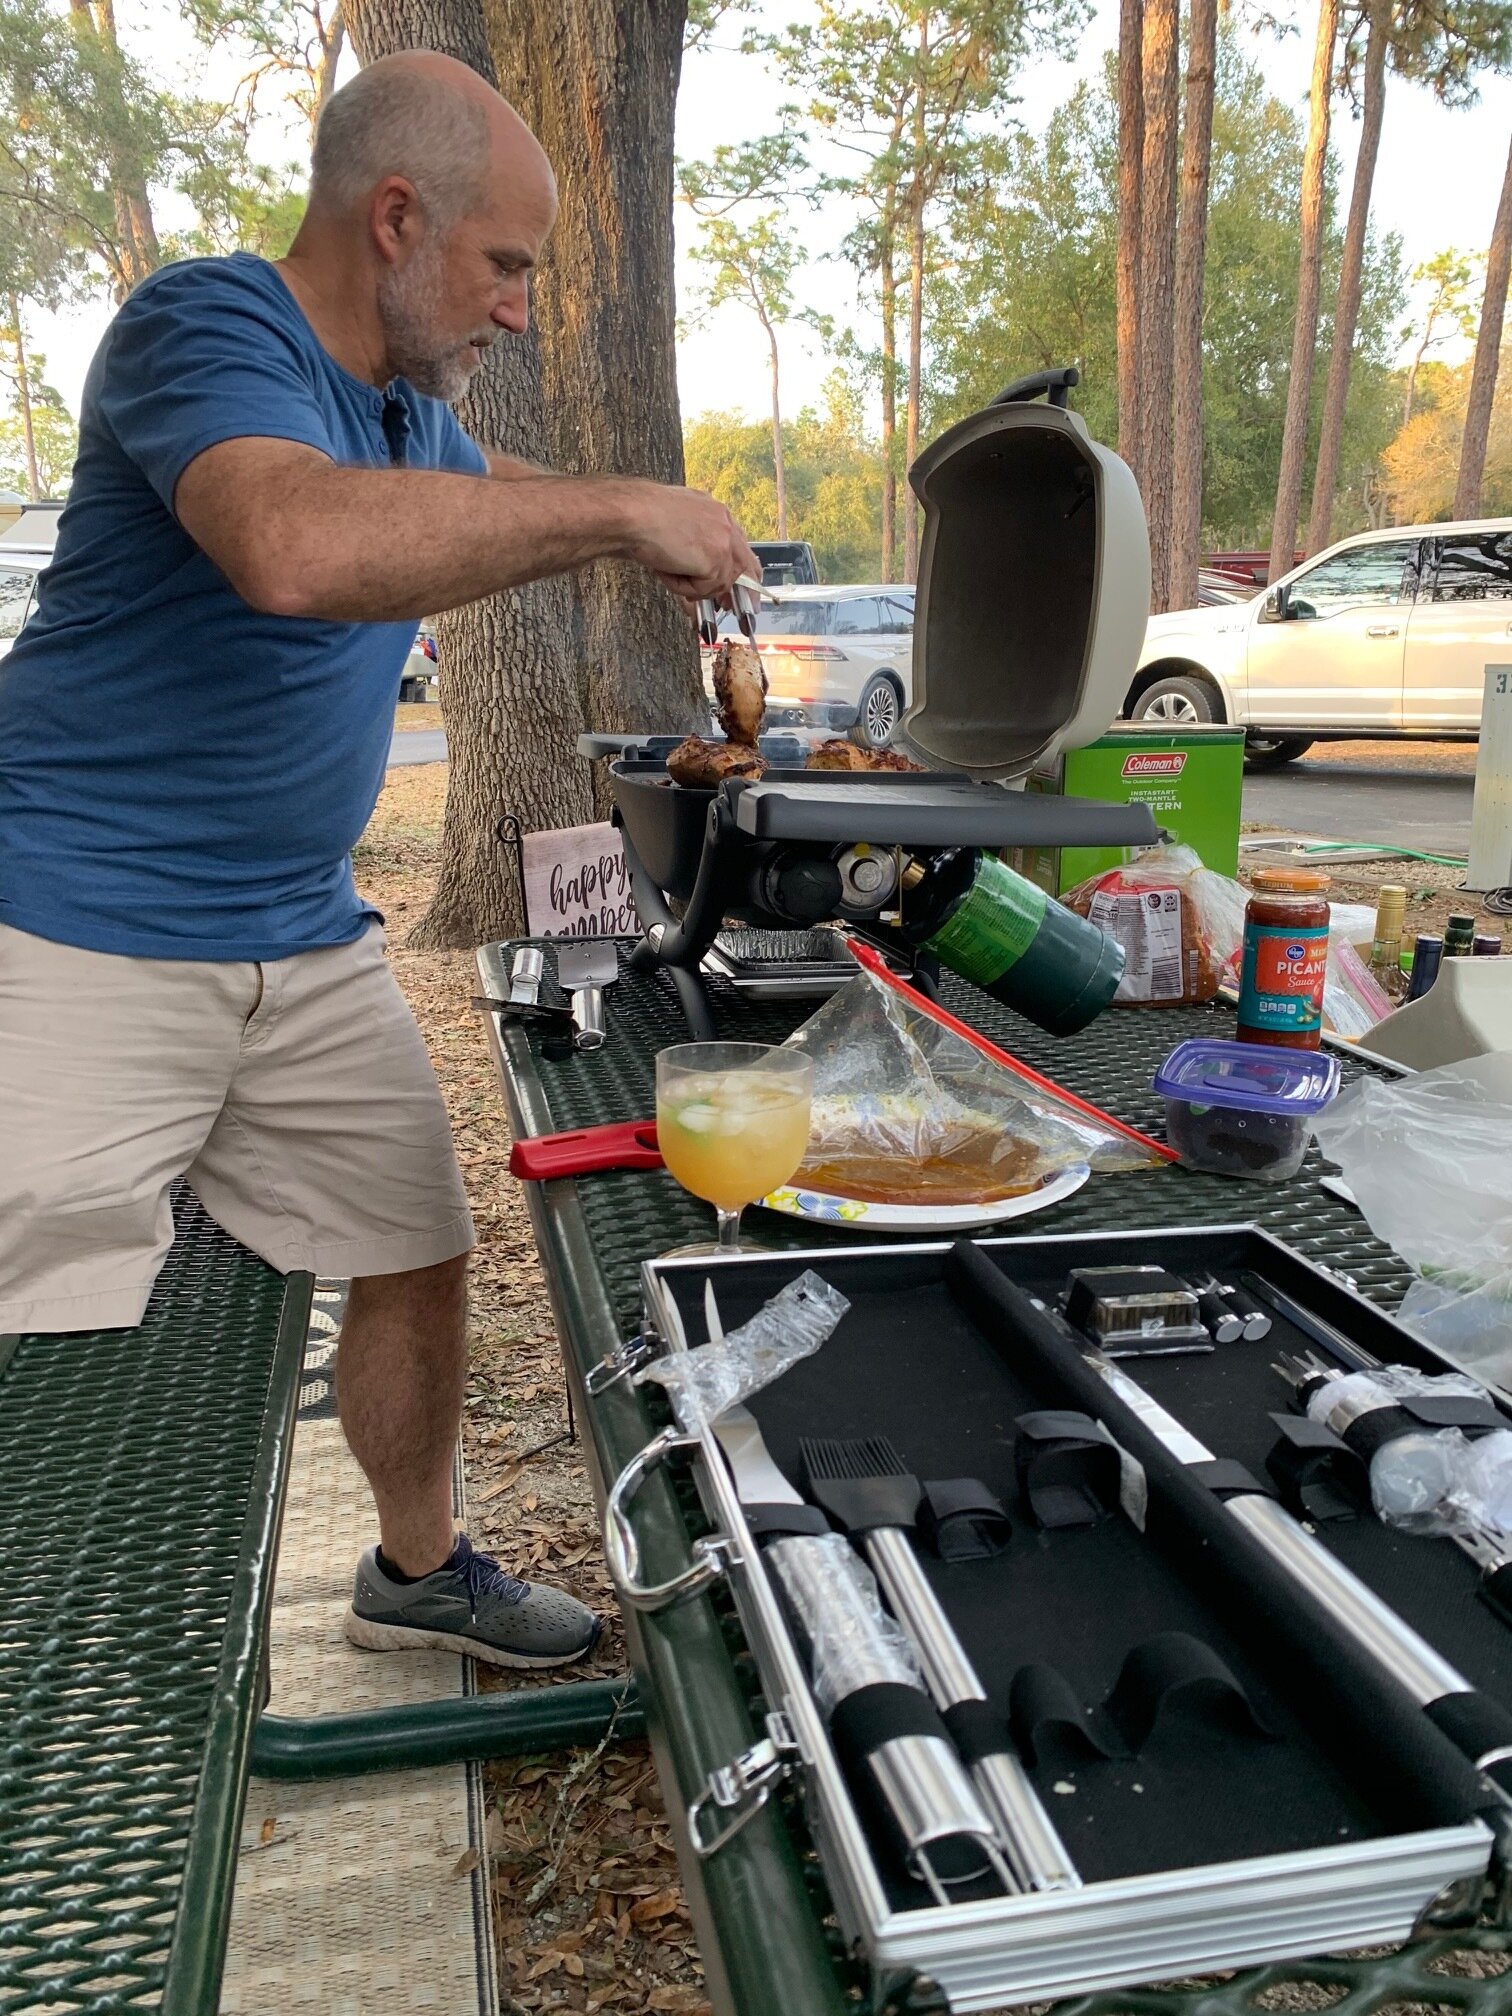  We’ve made some delicious grill food since we’ve been out on the road.  